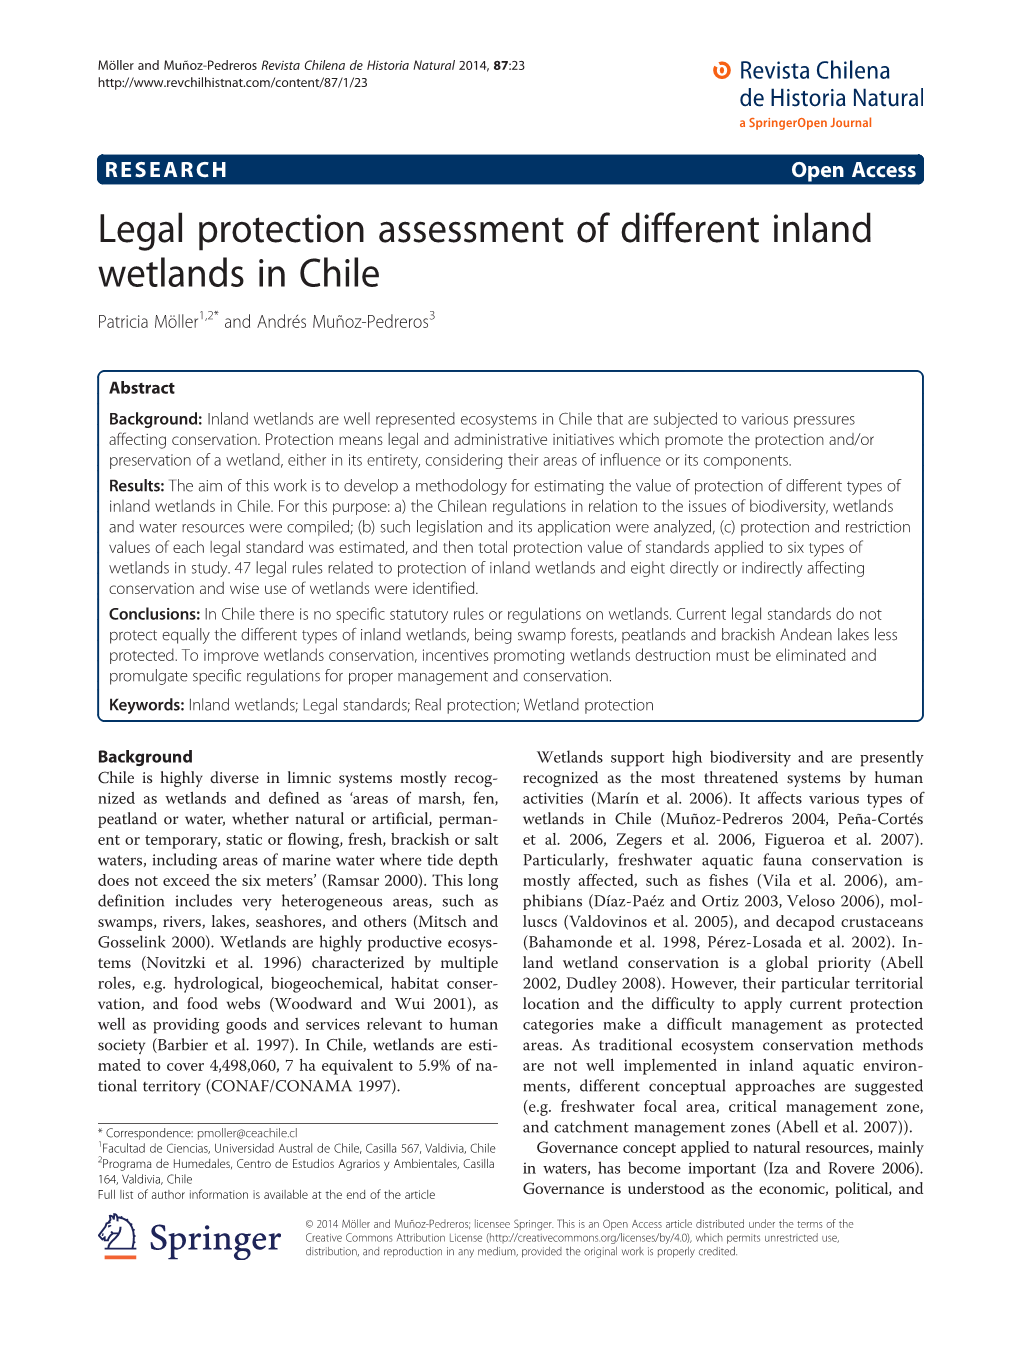 Legal Protection Assessment of Different Inland Wetlands in Chile Patricia Möller1,2* and Andrés Muñoz-Pedreros3